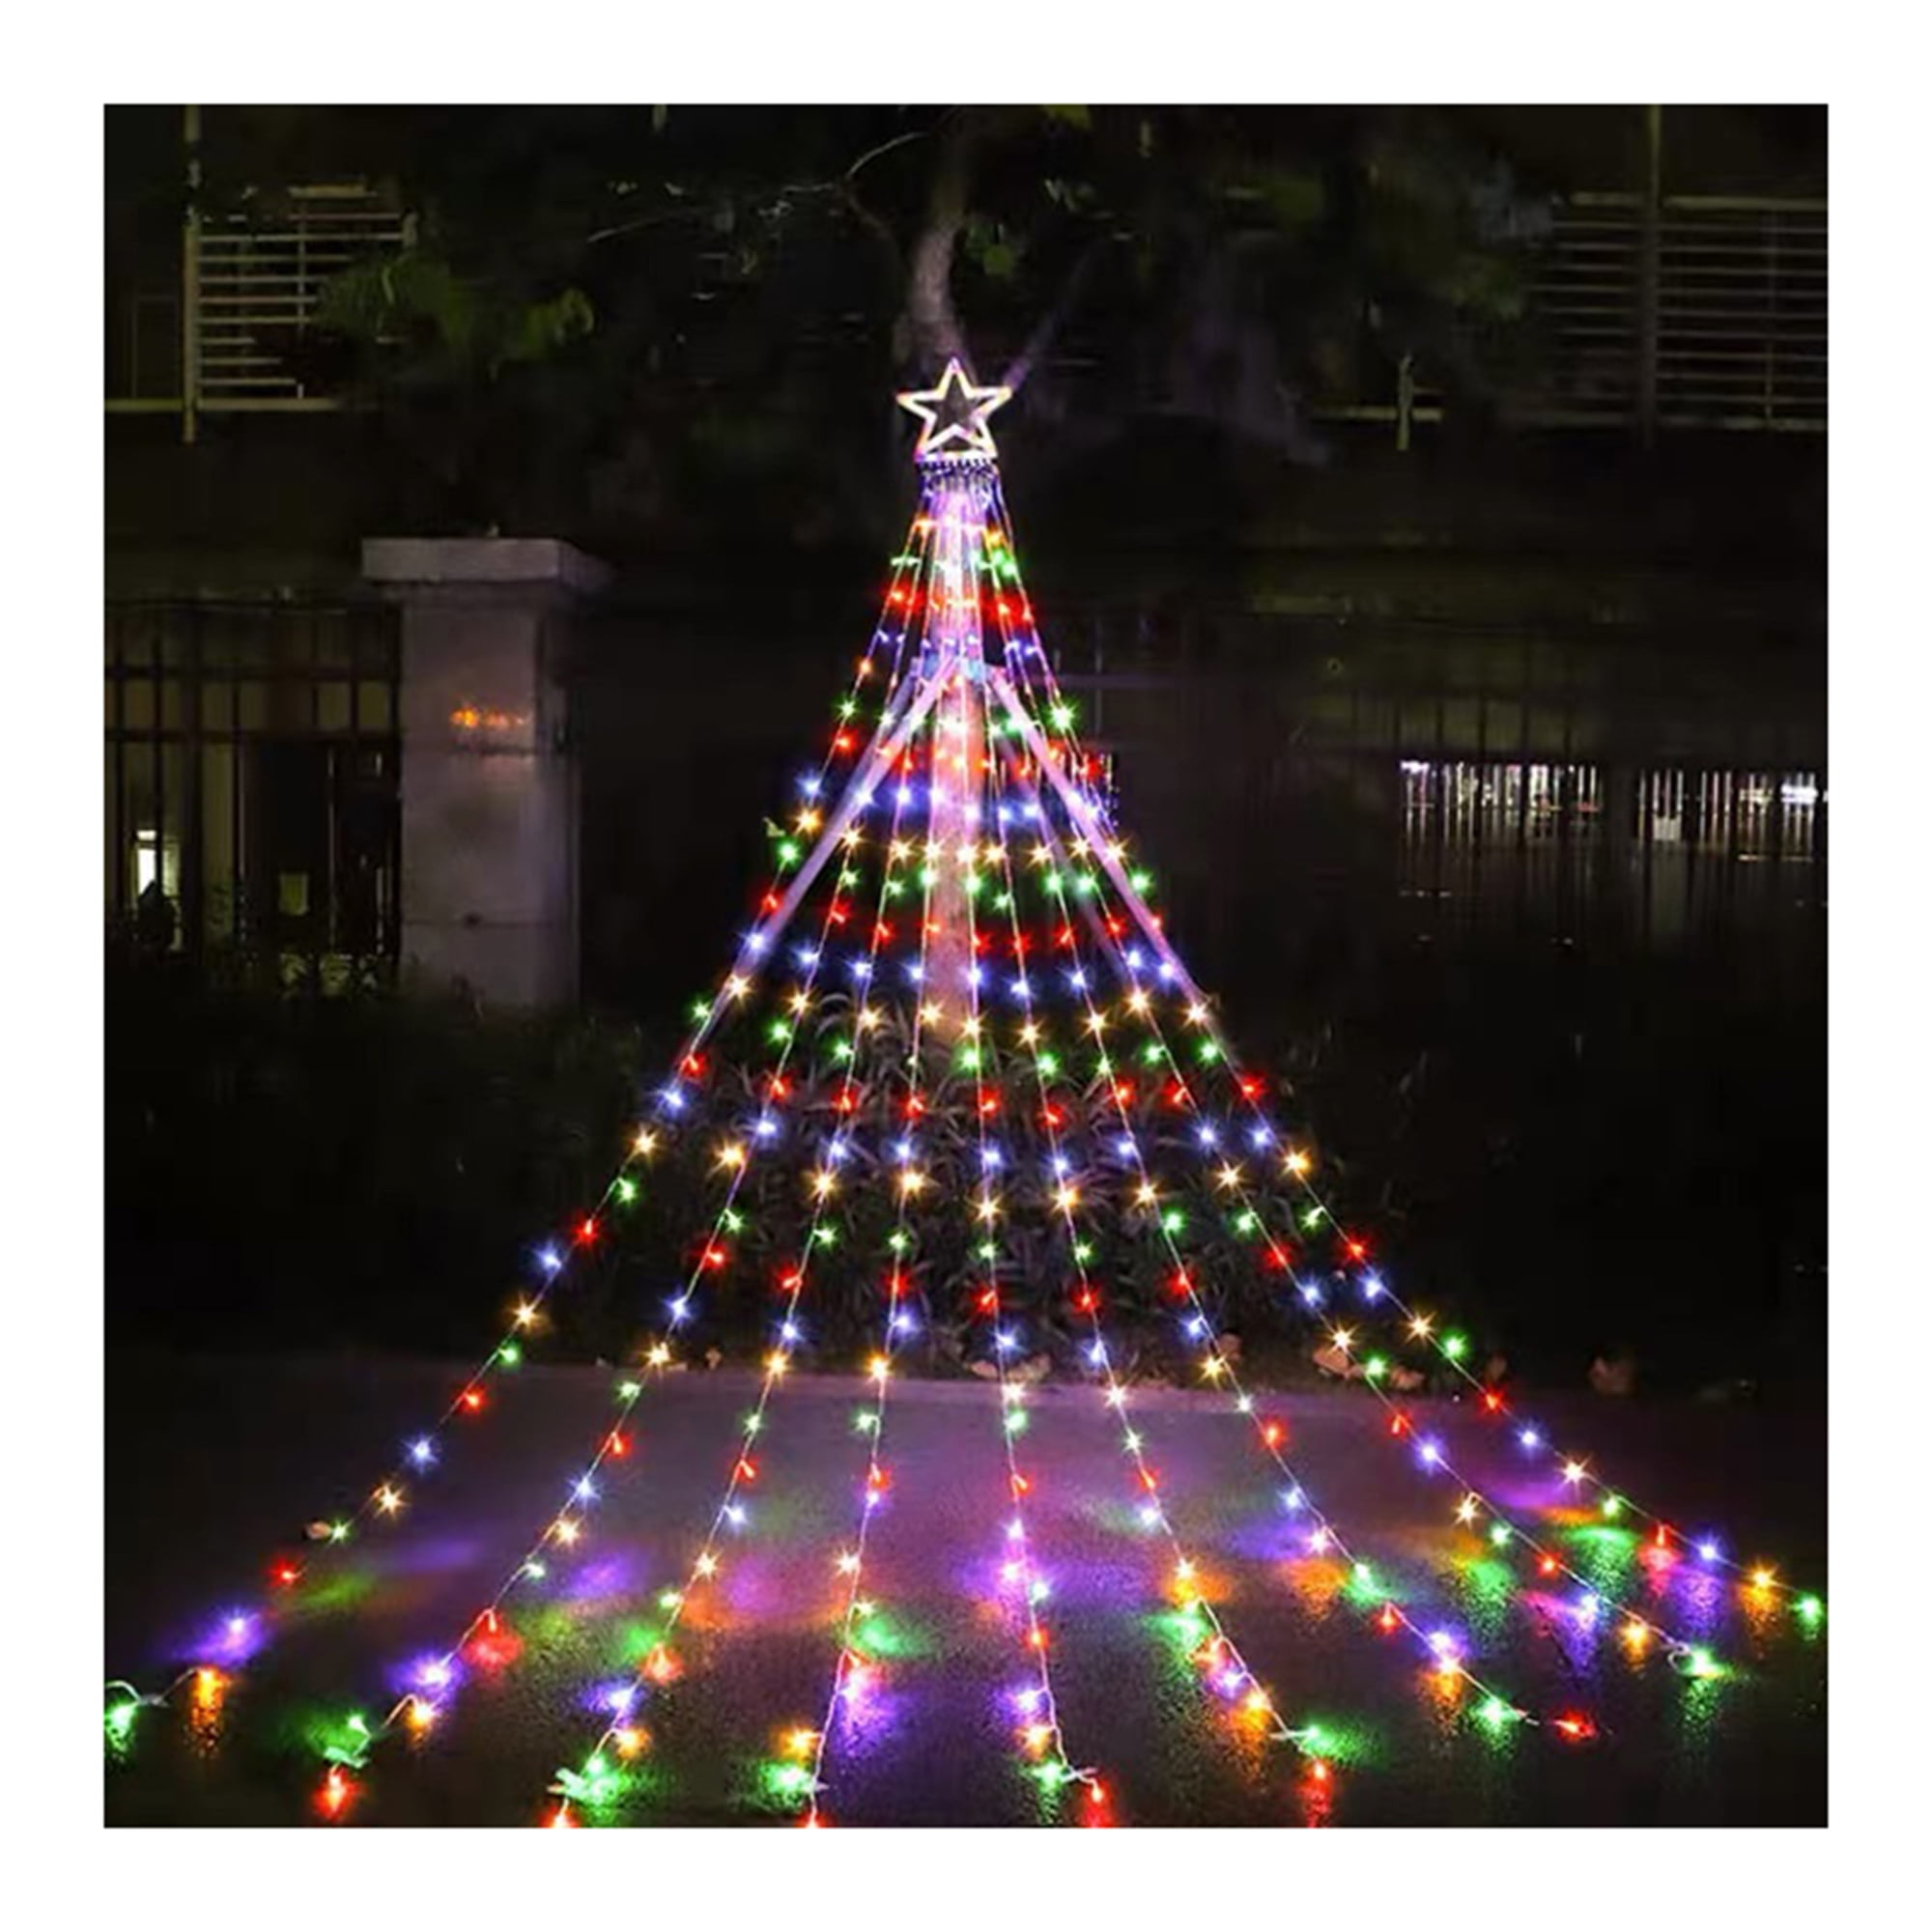 Outdoor 200 LED Lights Waterfall String Fairy Icicle Lights Party Garden Decor 